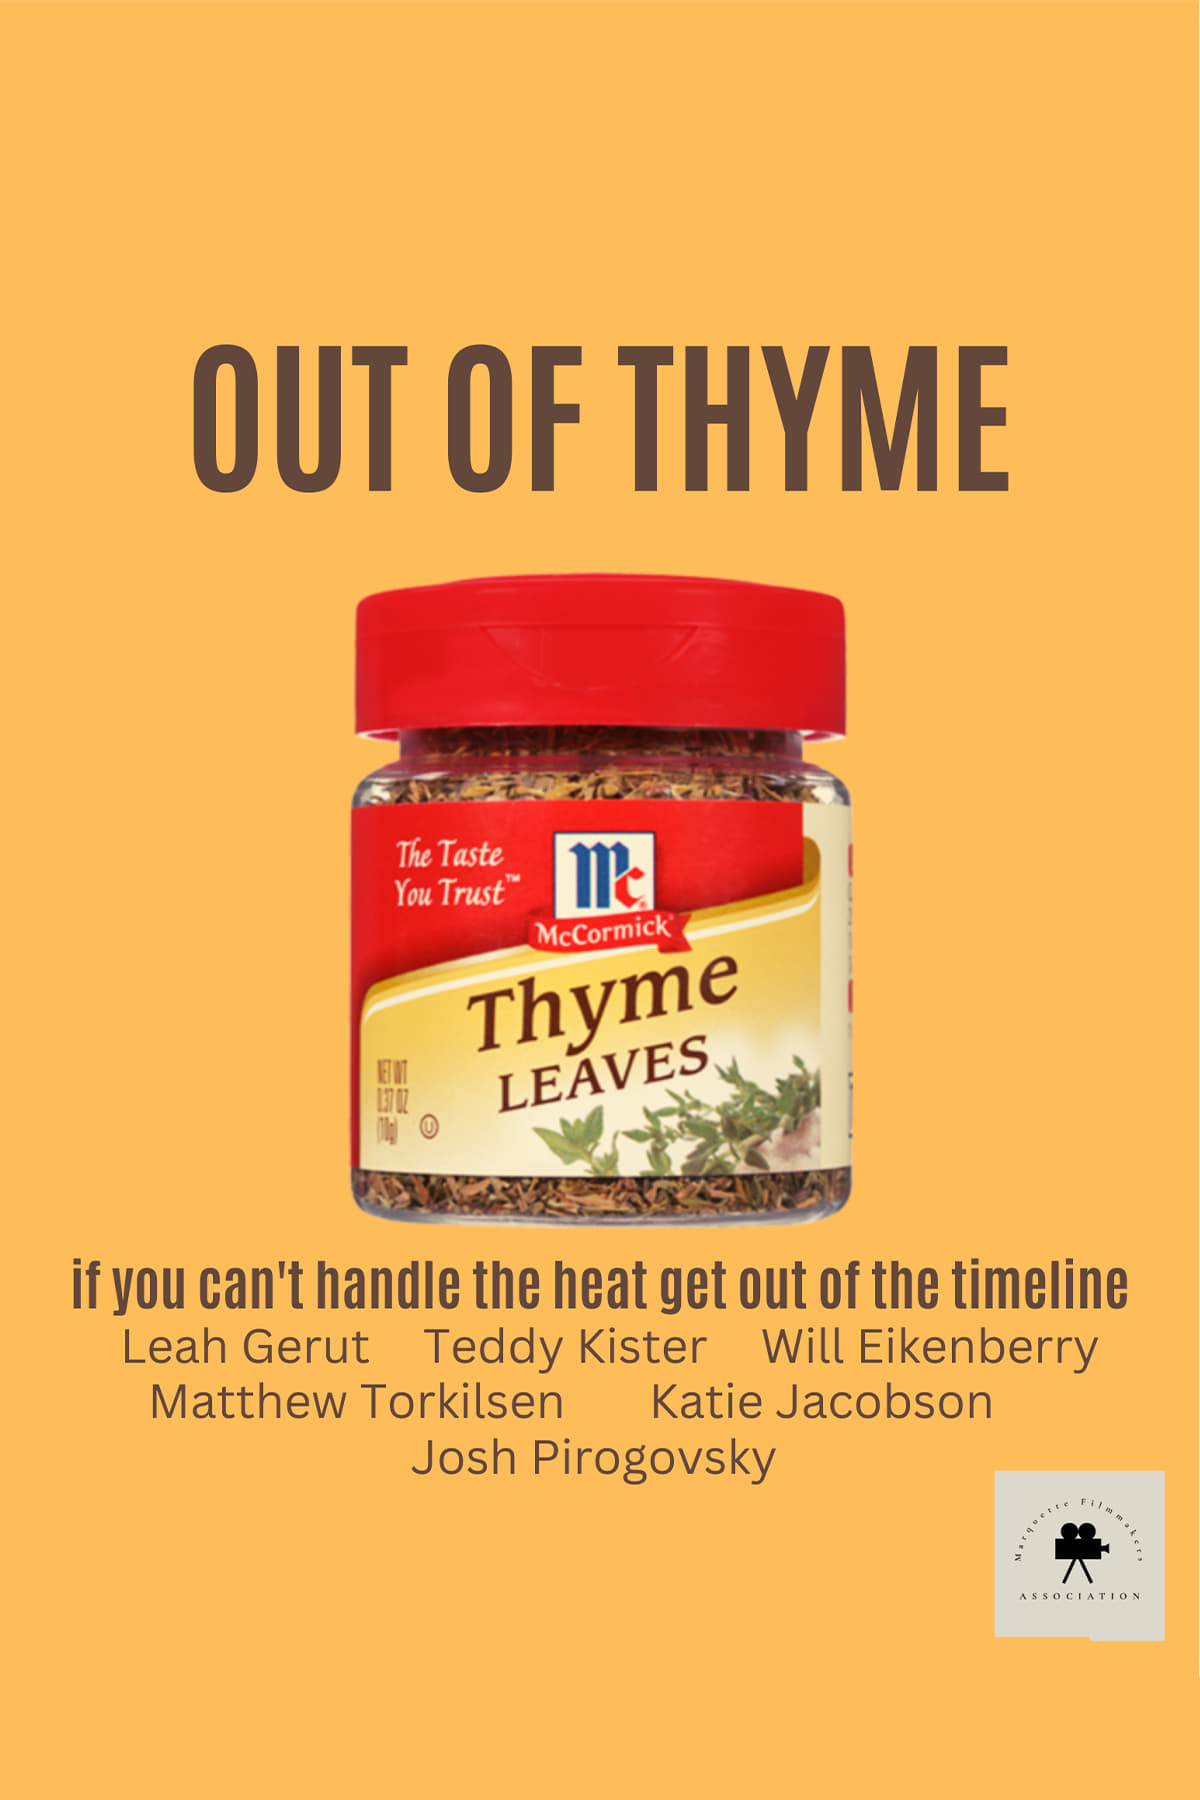 Out of Thyme